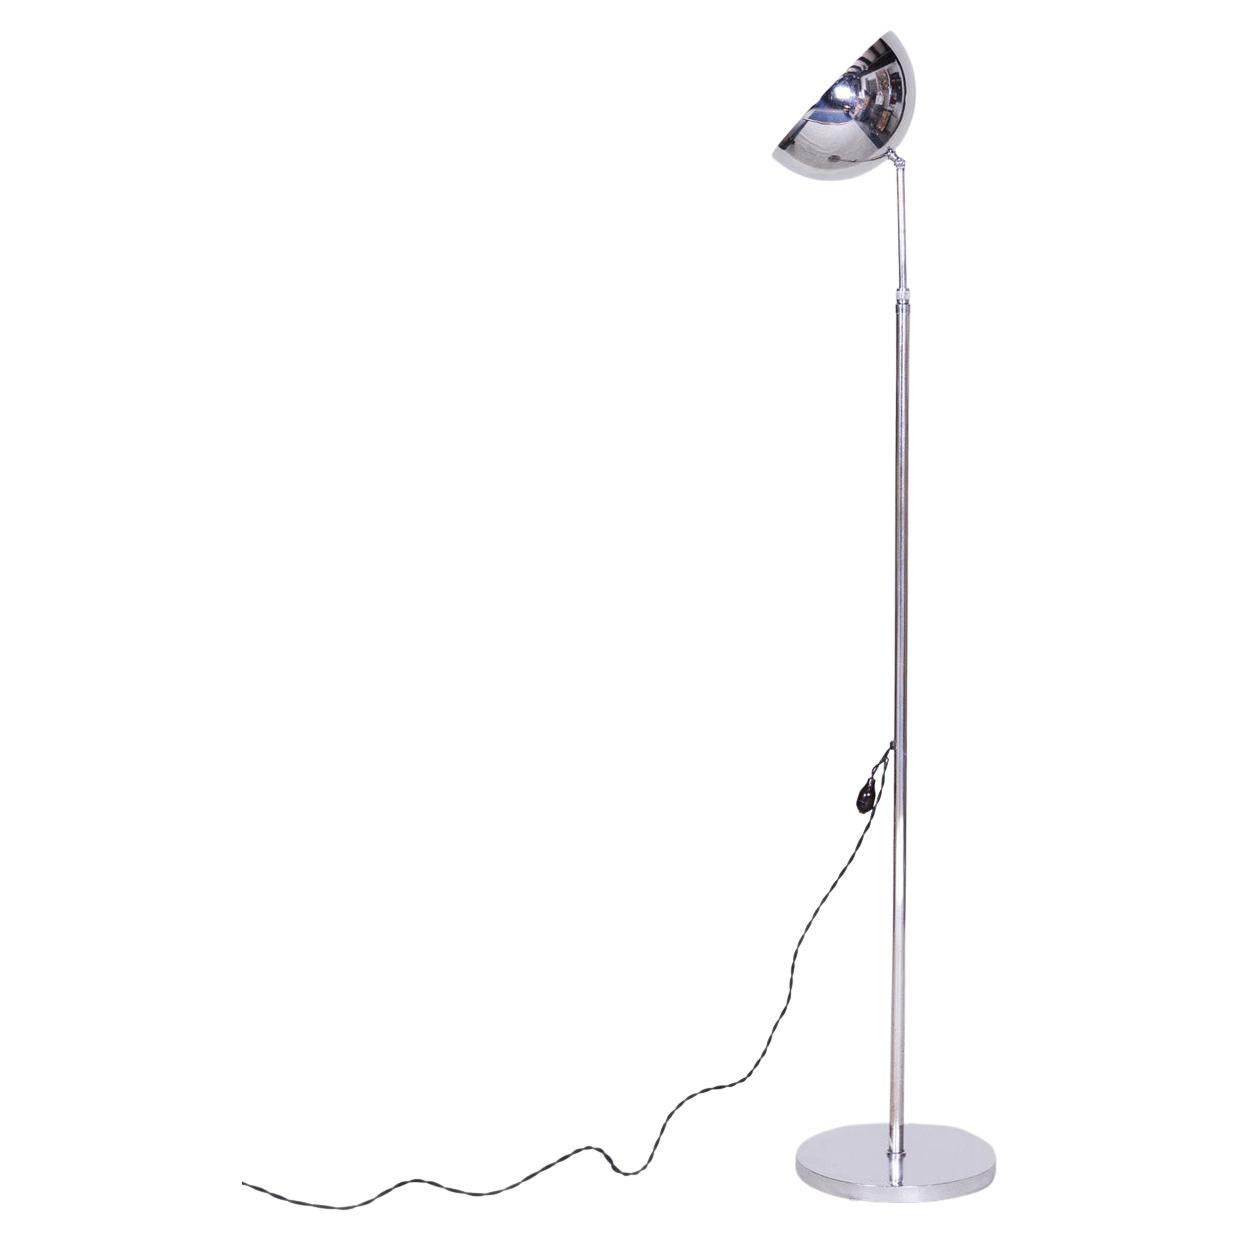 Restored Bauhaus Floor Lamp Made in the 1930s, Made Out of Chrome Plated Steel